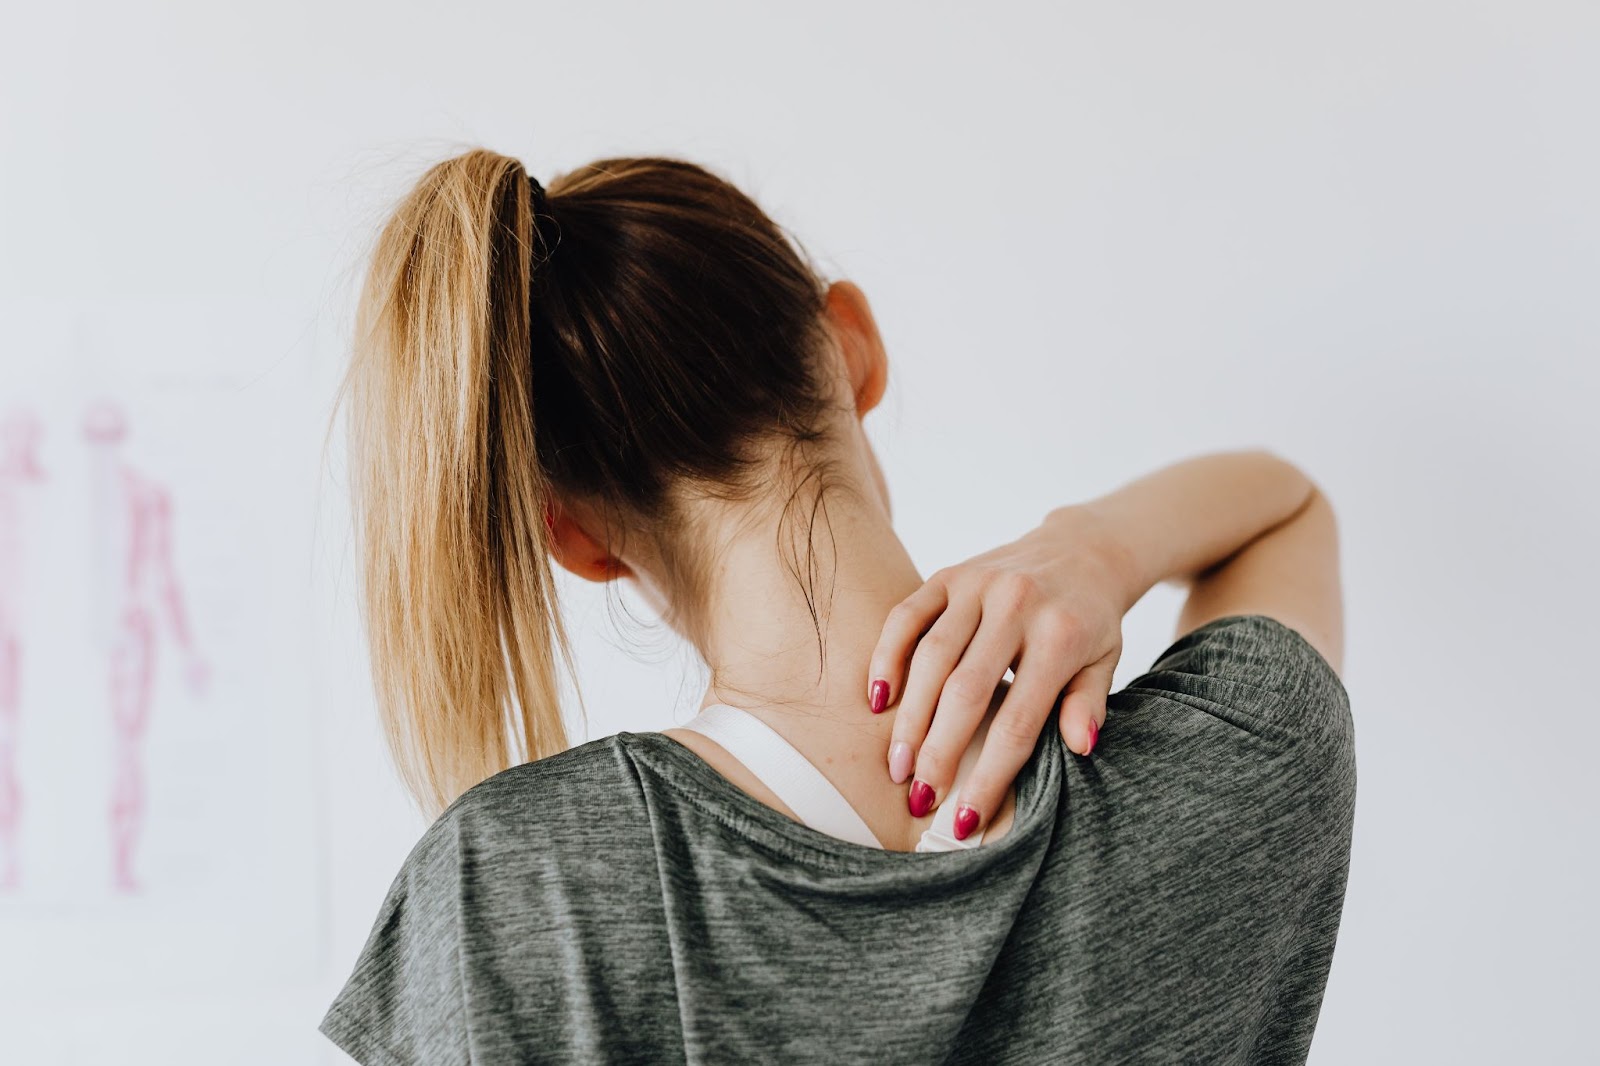 7 Preventative Measures To Help With Neck Pain